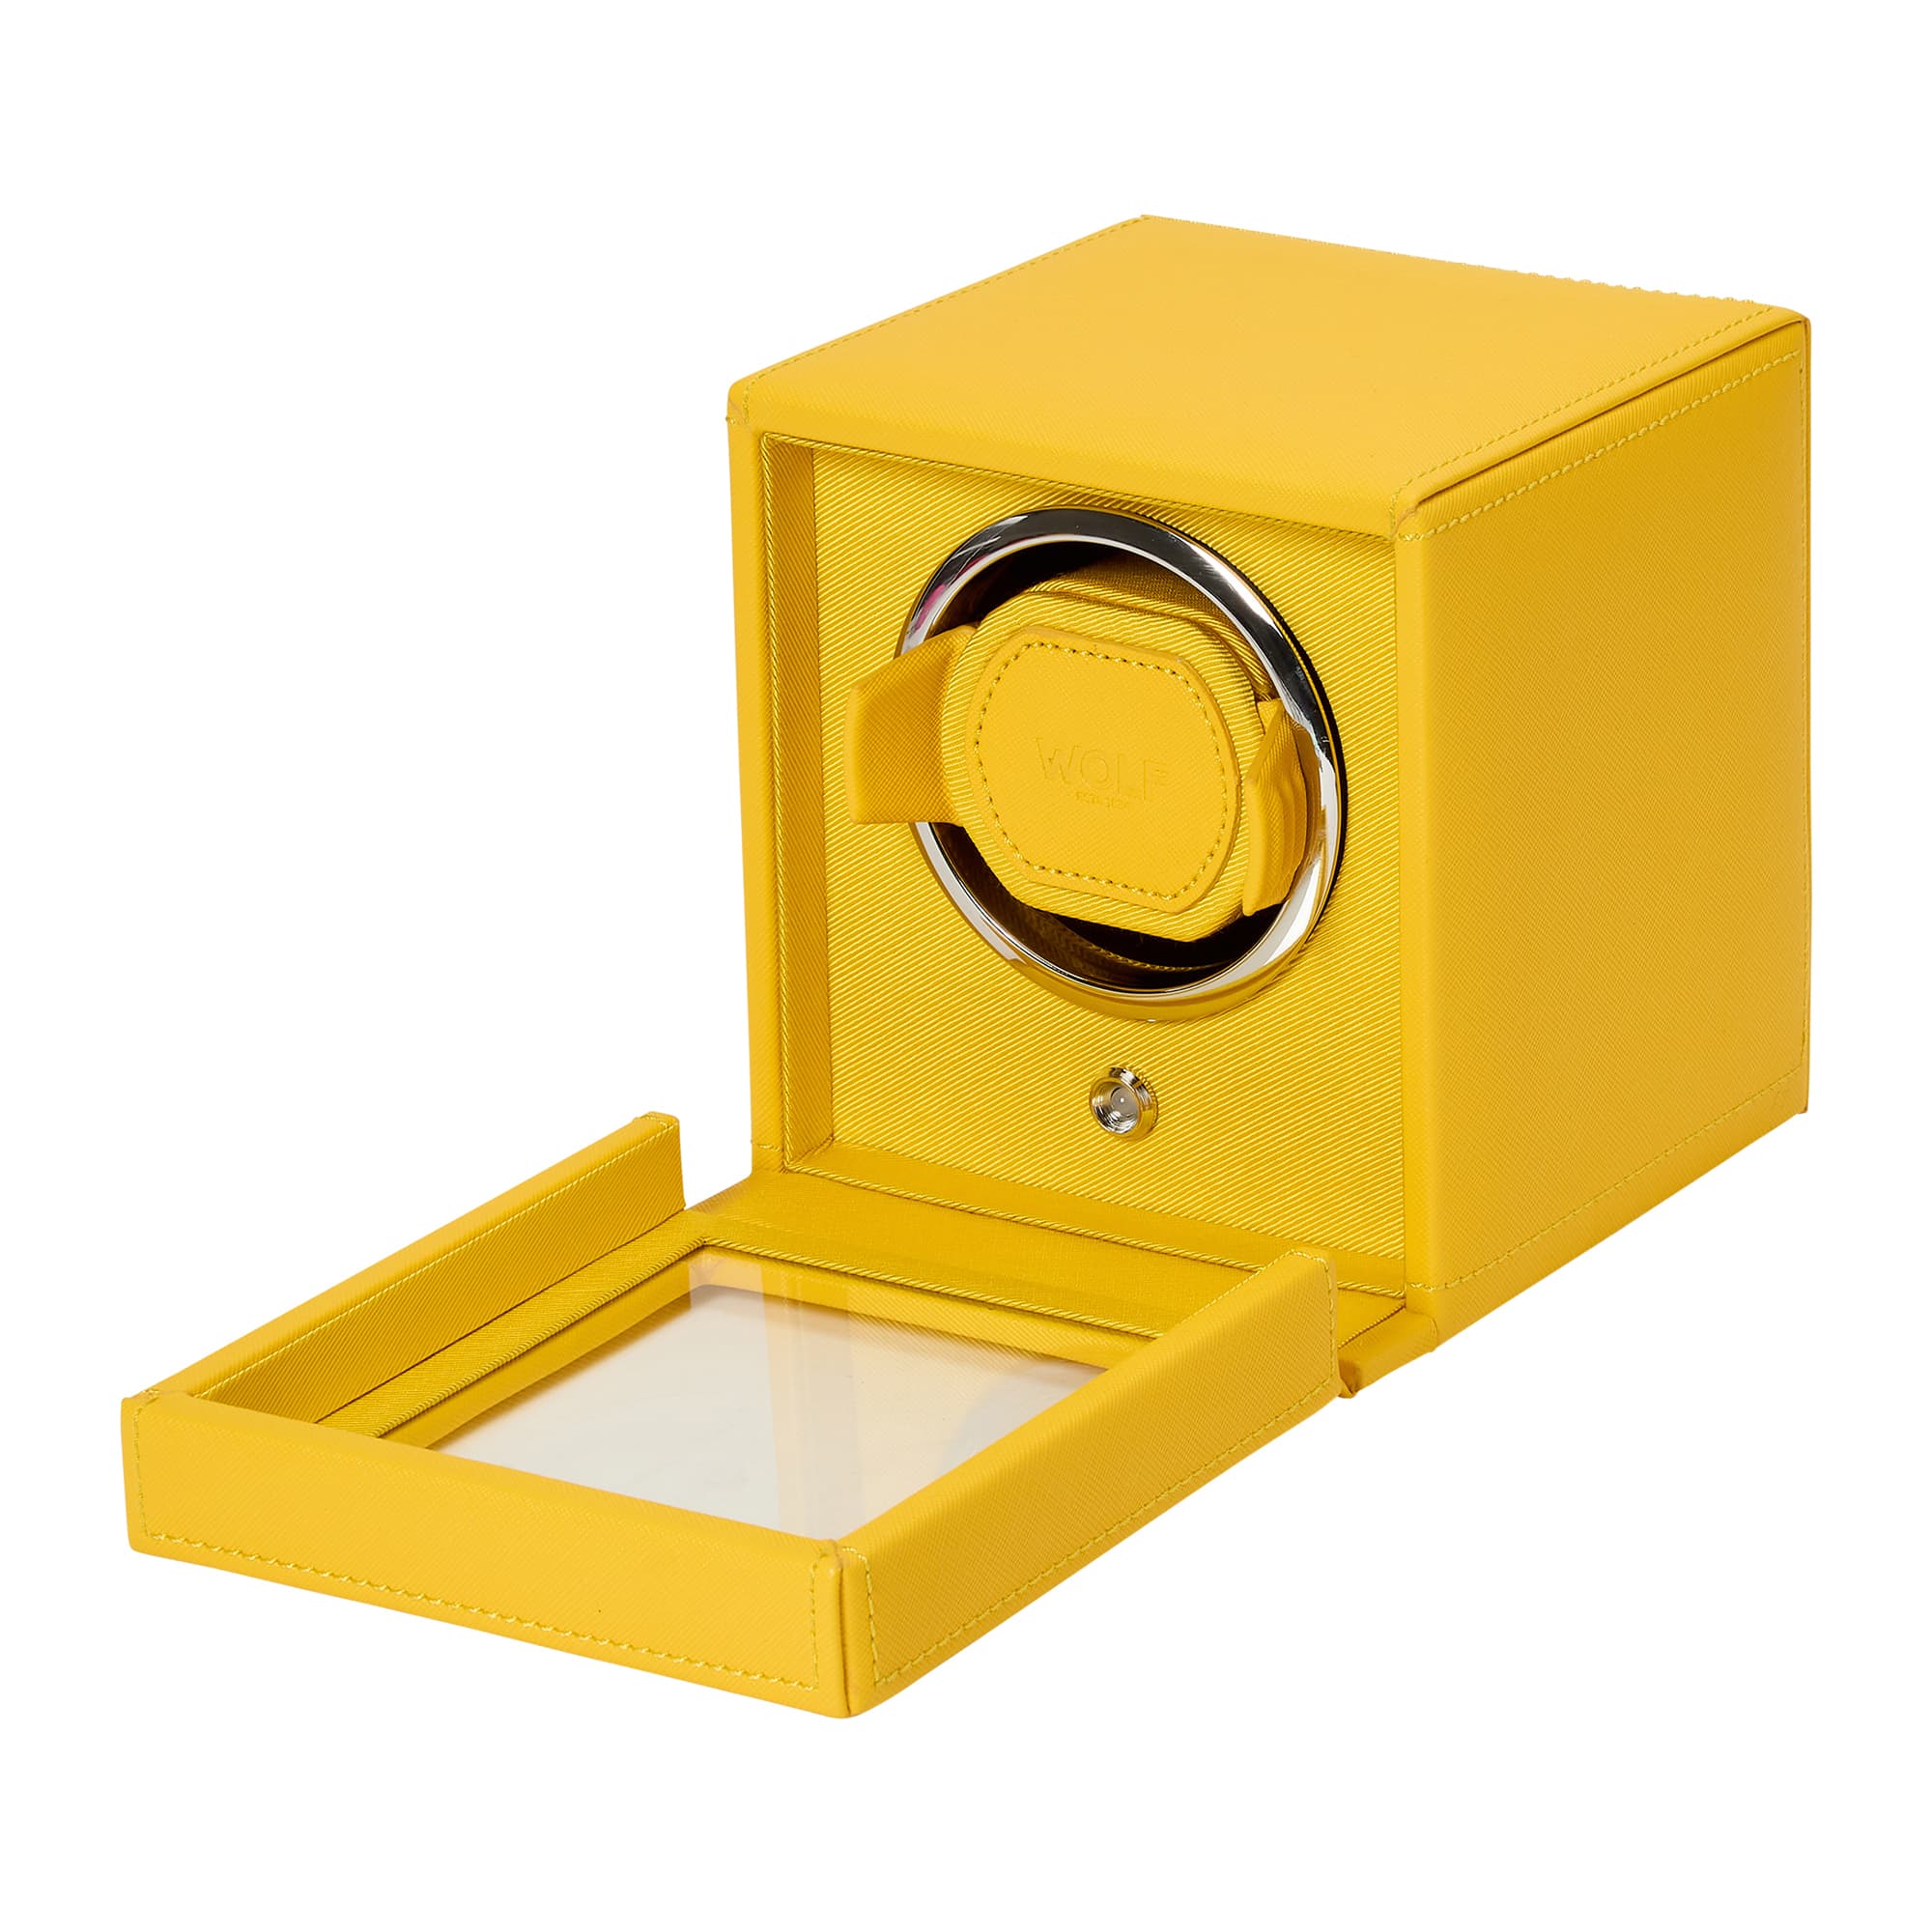 Wolf-Cub-Single-Watch-Winder-with-Cover-Yellow-461192-3